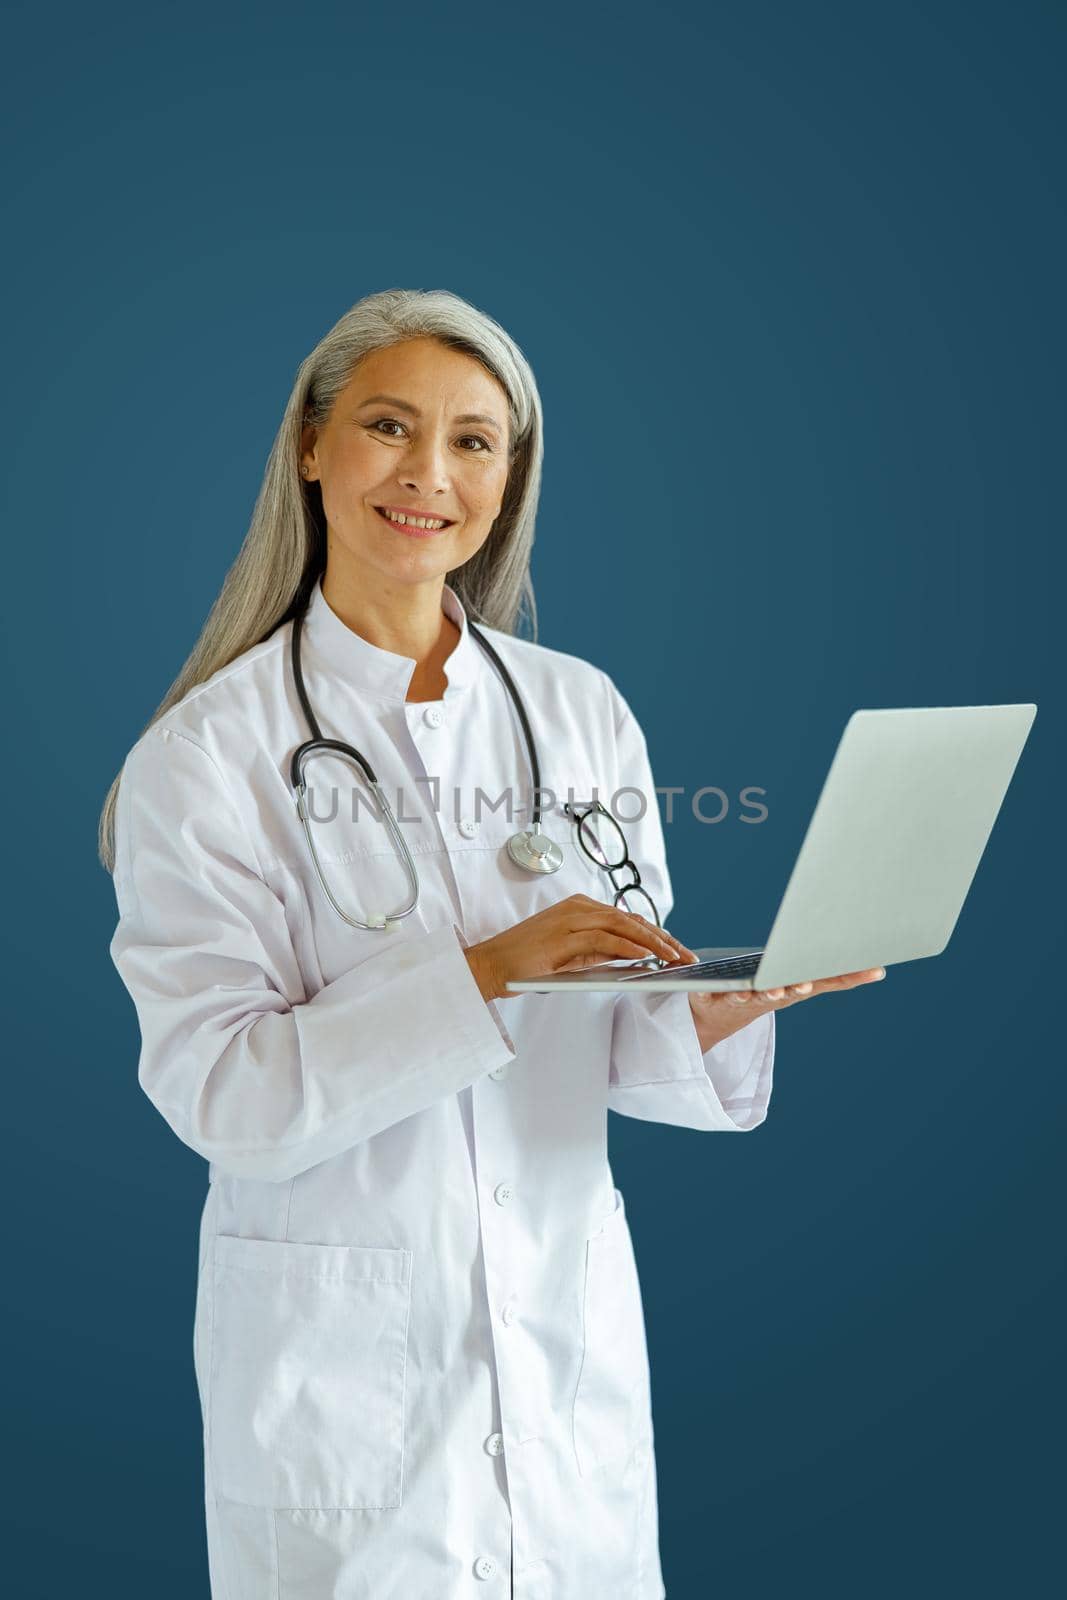 Cheerful mature lady doctor in white robe uses modern laptop standing on blue background in studio. Telemedicine patient service